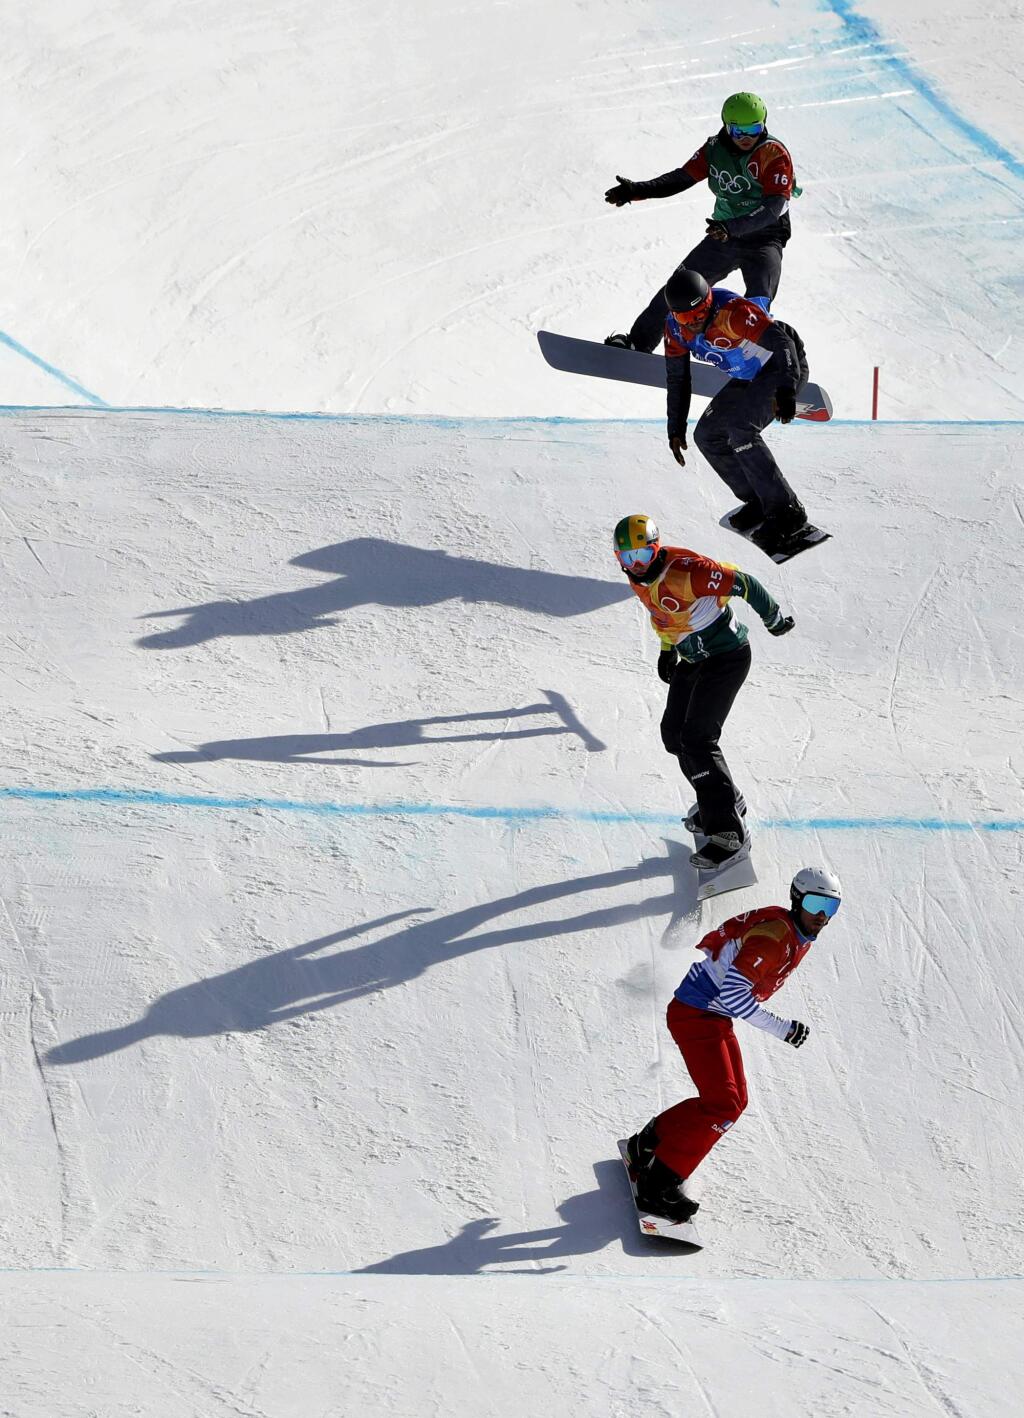 From bottom to top; Pierre Vaultier, of France, Jarryd Hughes, of Australia, Markus Schairer, of Austria, and Hanno Douschan, of Austria, runs the course during the men's snowboard cross elimination round at Phoenix Snow Park at the 2018 Winter Olympics in Pyeongchang, South Korea, Thursday, Feb. 15, 2018. (AP Photo/Gregory Bull)